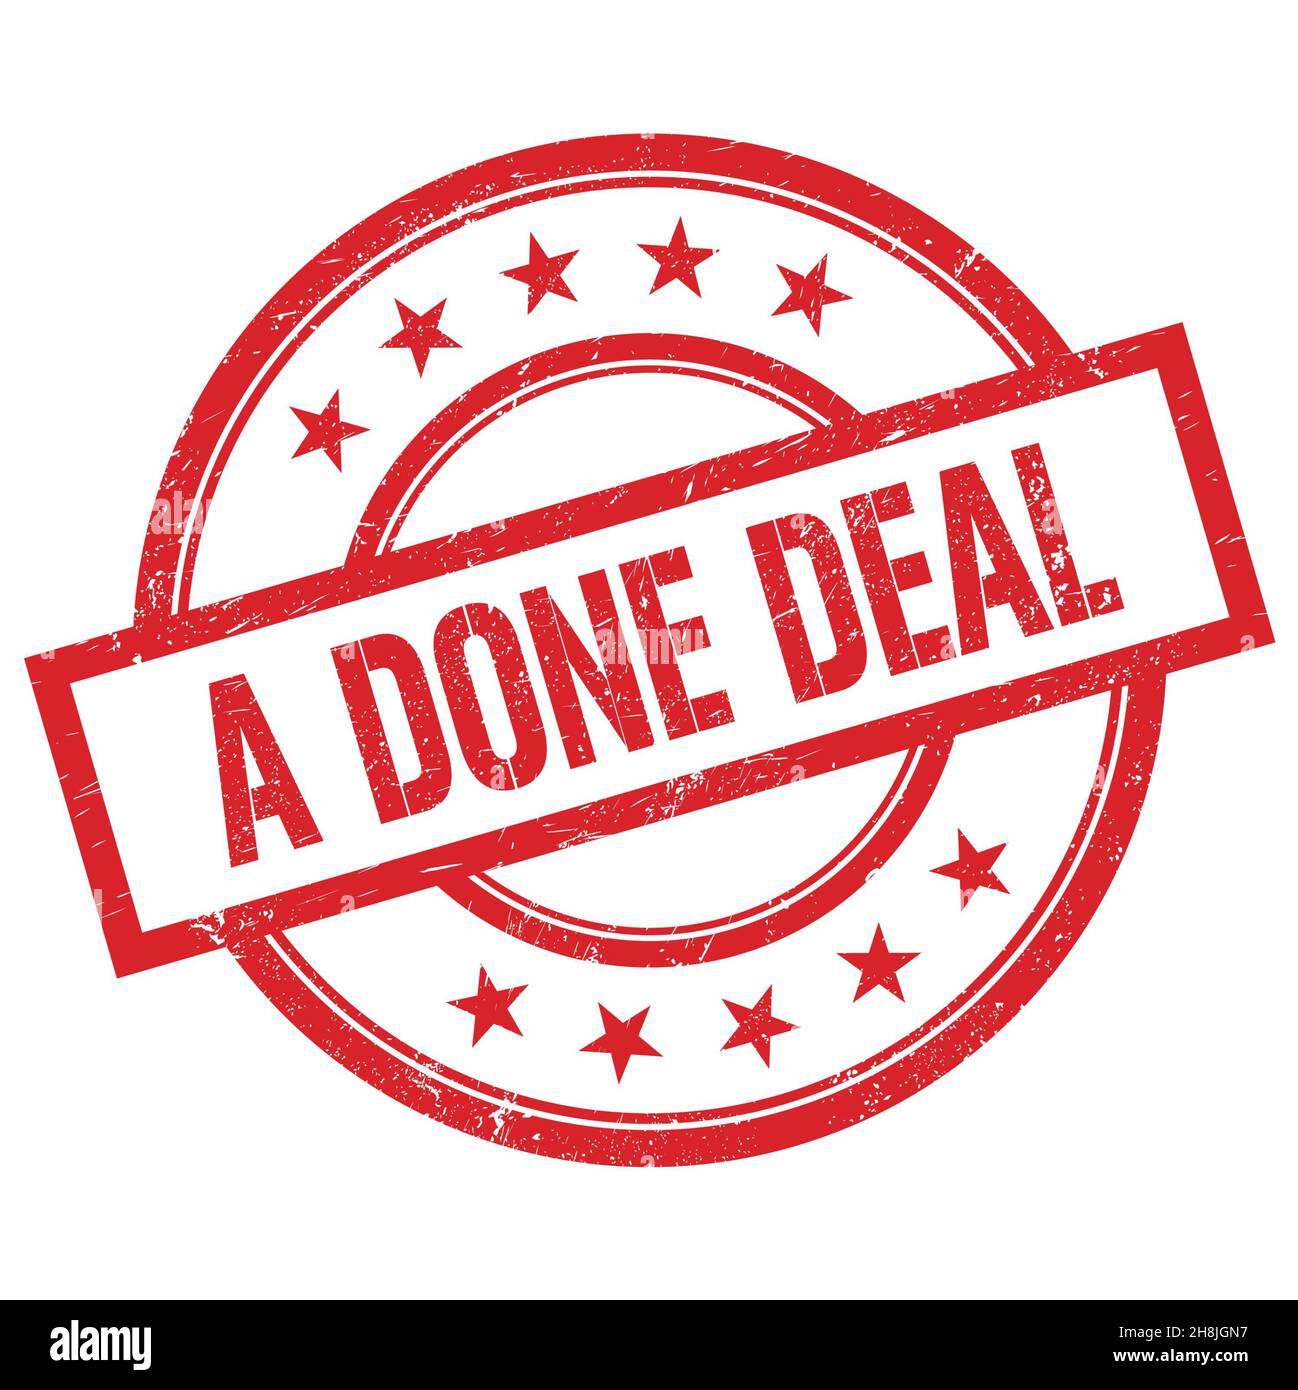 A DONE DEAL text written on red round vintage rubber stamp. Stock Photo